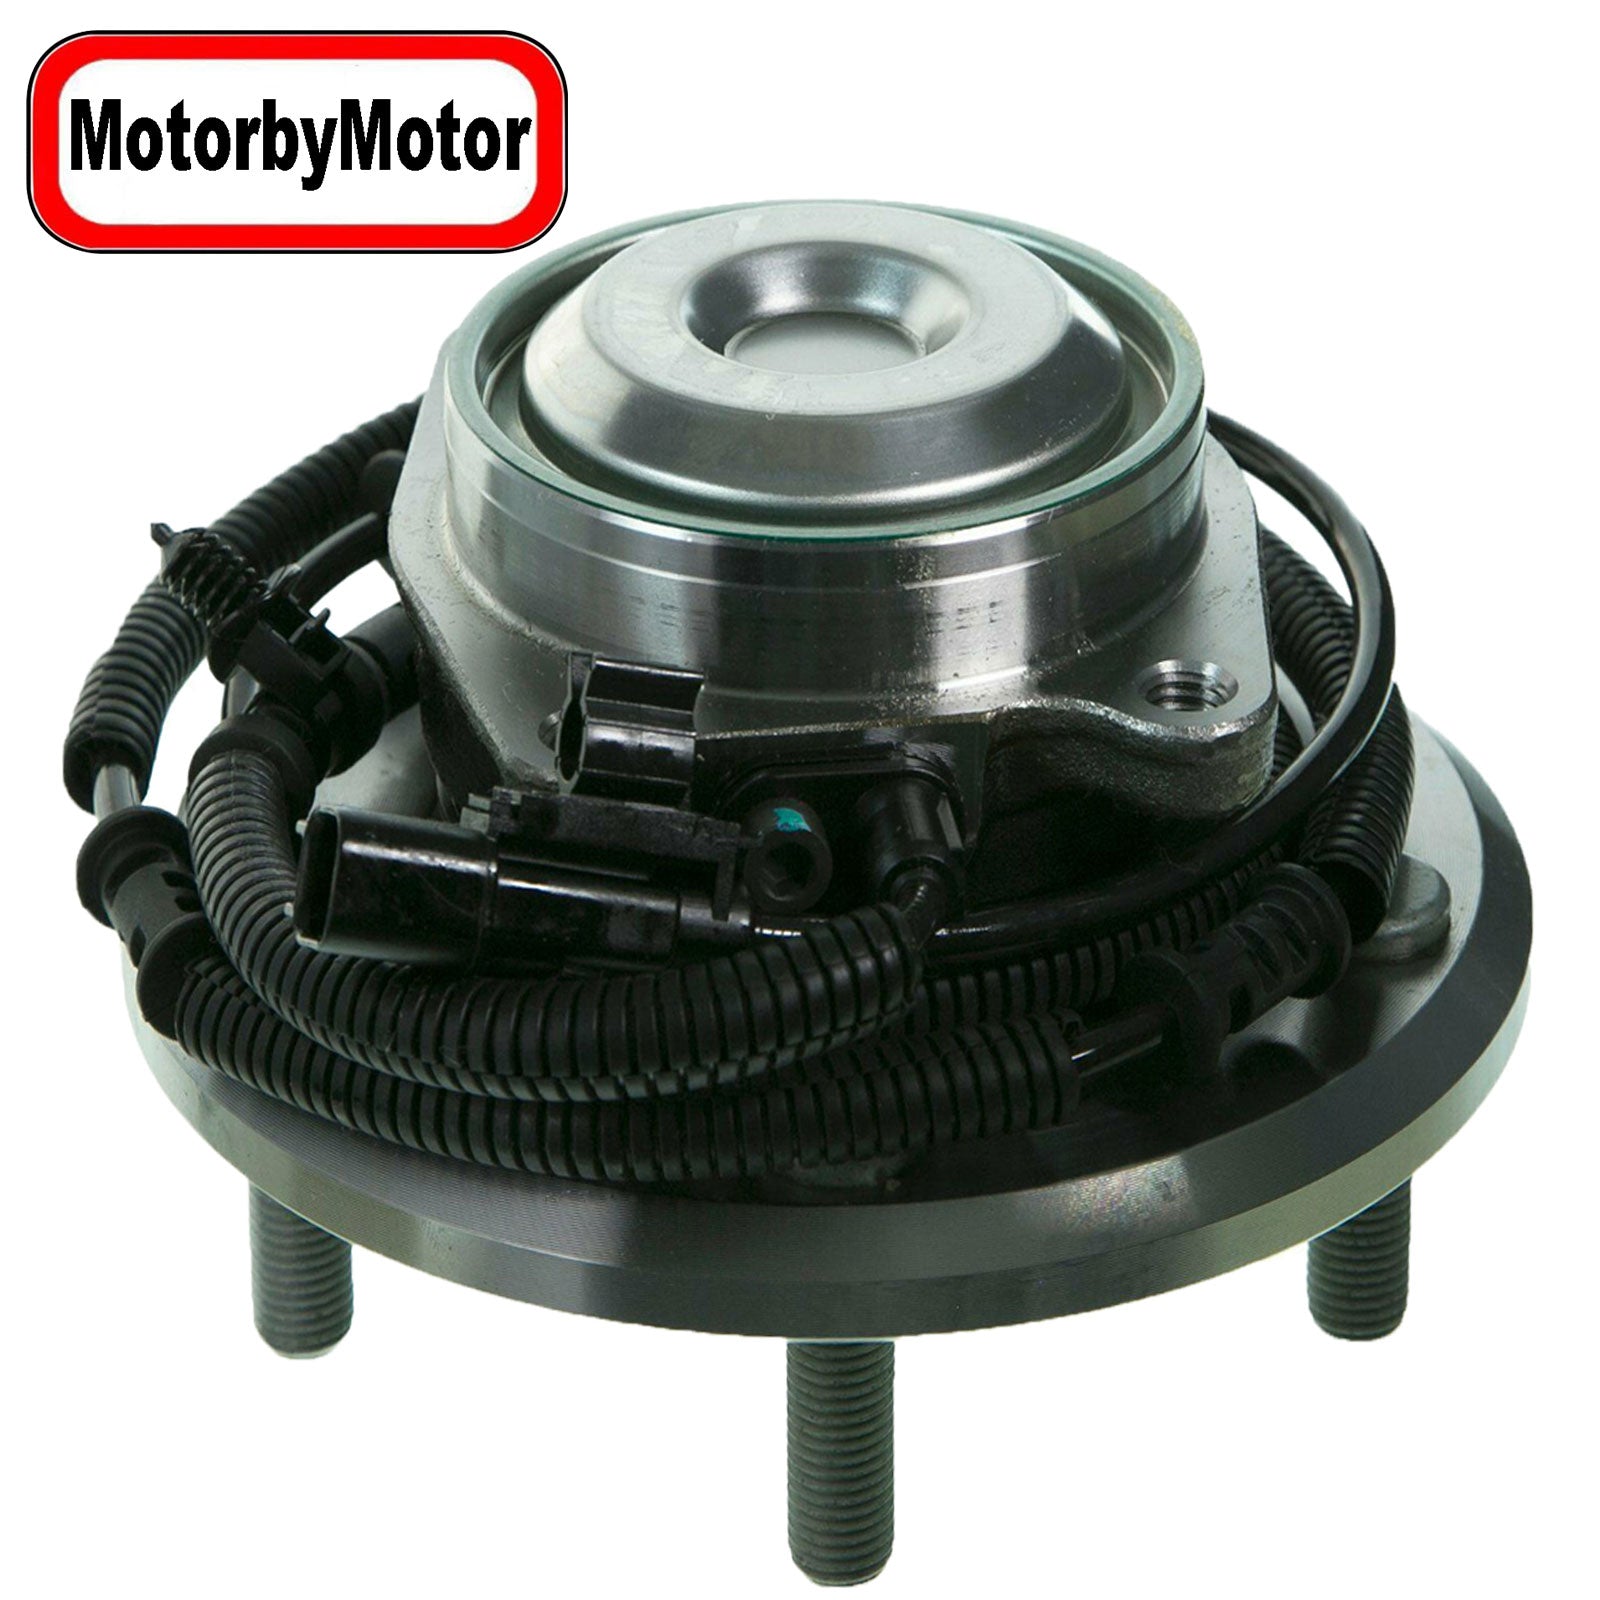 MotorbyMotor 512493 Rear Wheel Bearing Hub Assembly with 5 Lugs Fits for 2012-2016 Chrysler Town & Country, 12-19 Dodge Grand Caravan,Ram C/V, Volkswagen Routan Hub Bearing Assembly MotorbyMotor